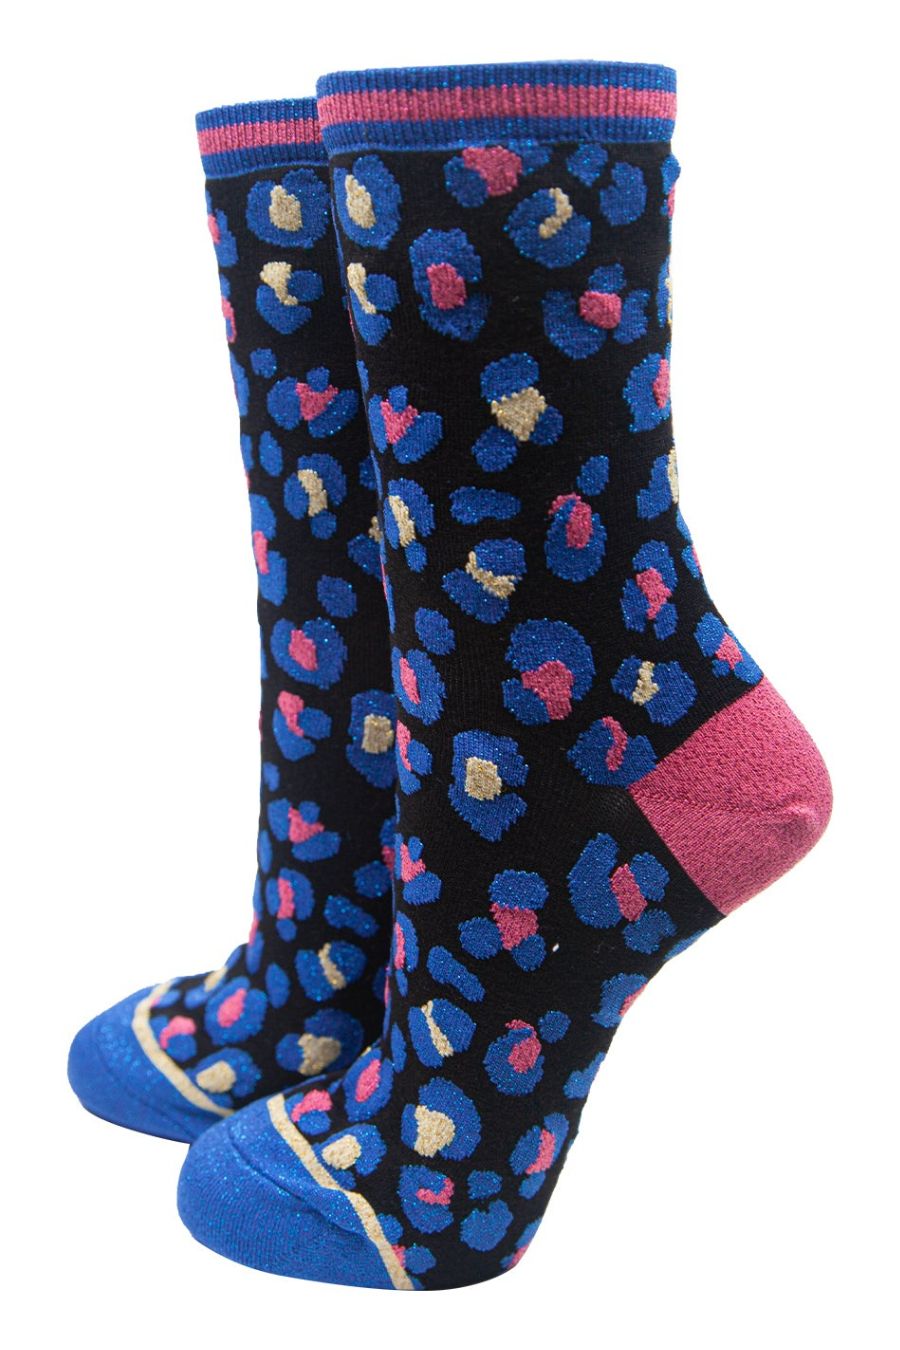 black ankle socks with an all over royal blue and pink leopard print patterns